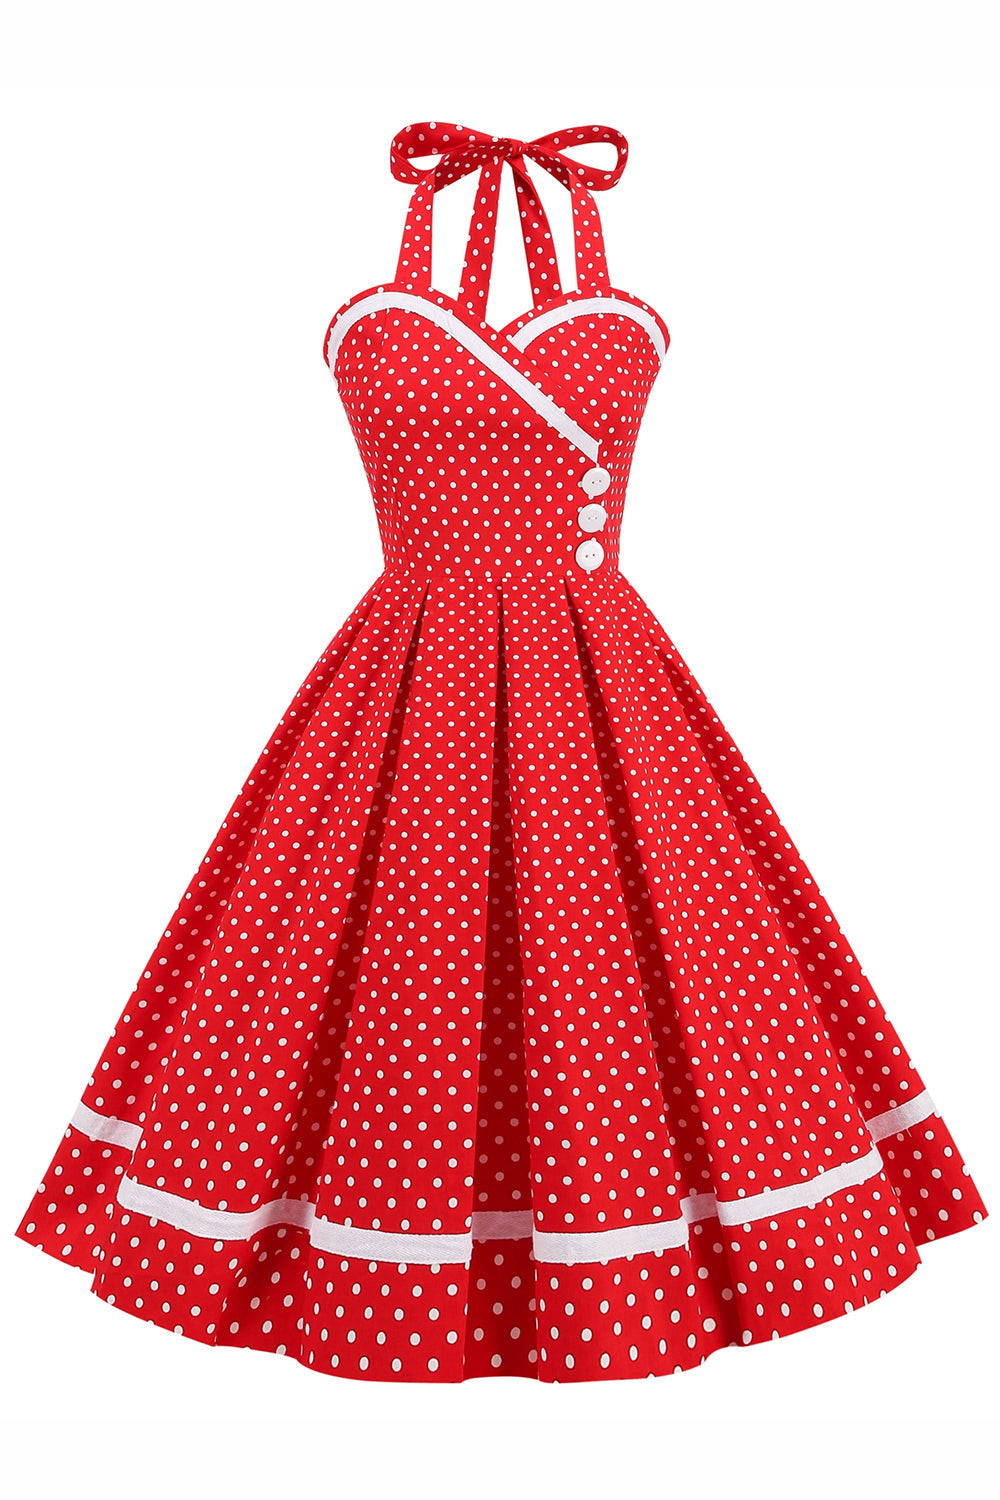 Halter Polka Dots Swing Dress with Buttons